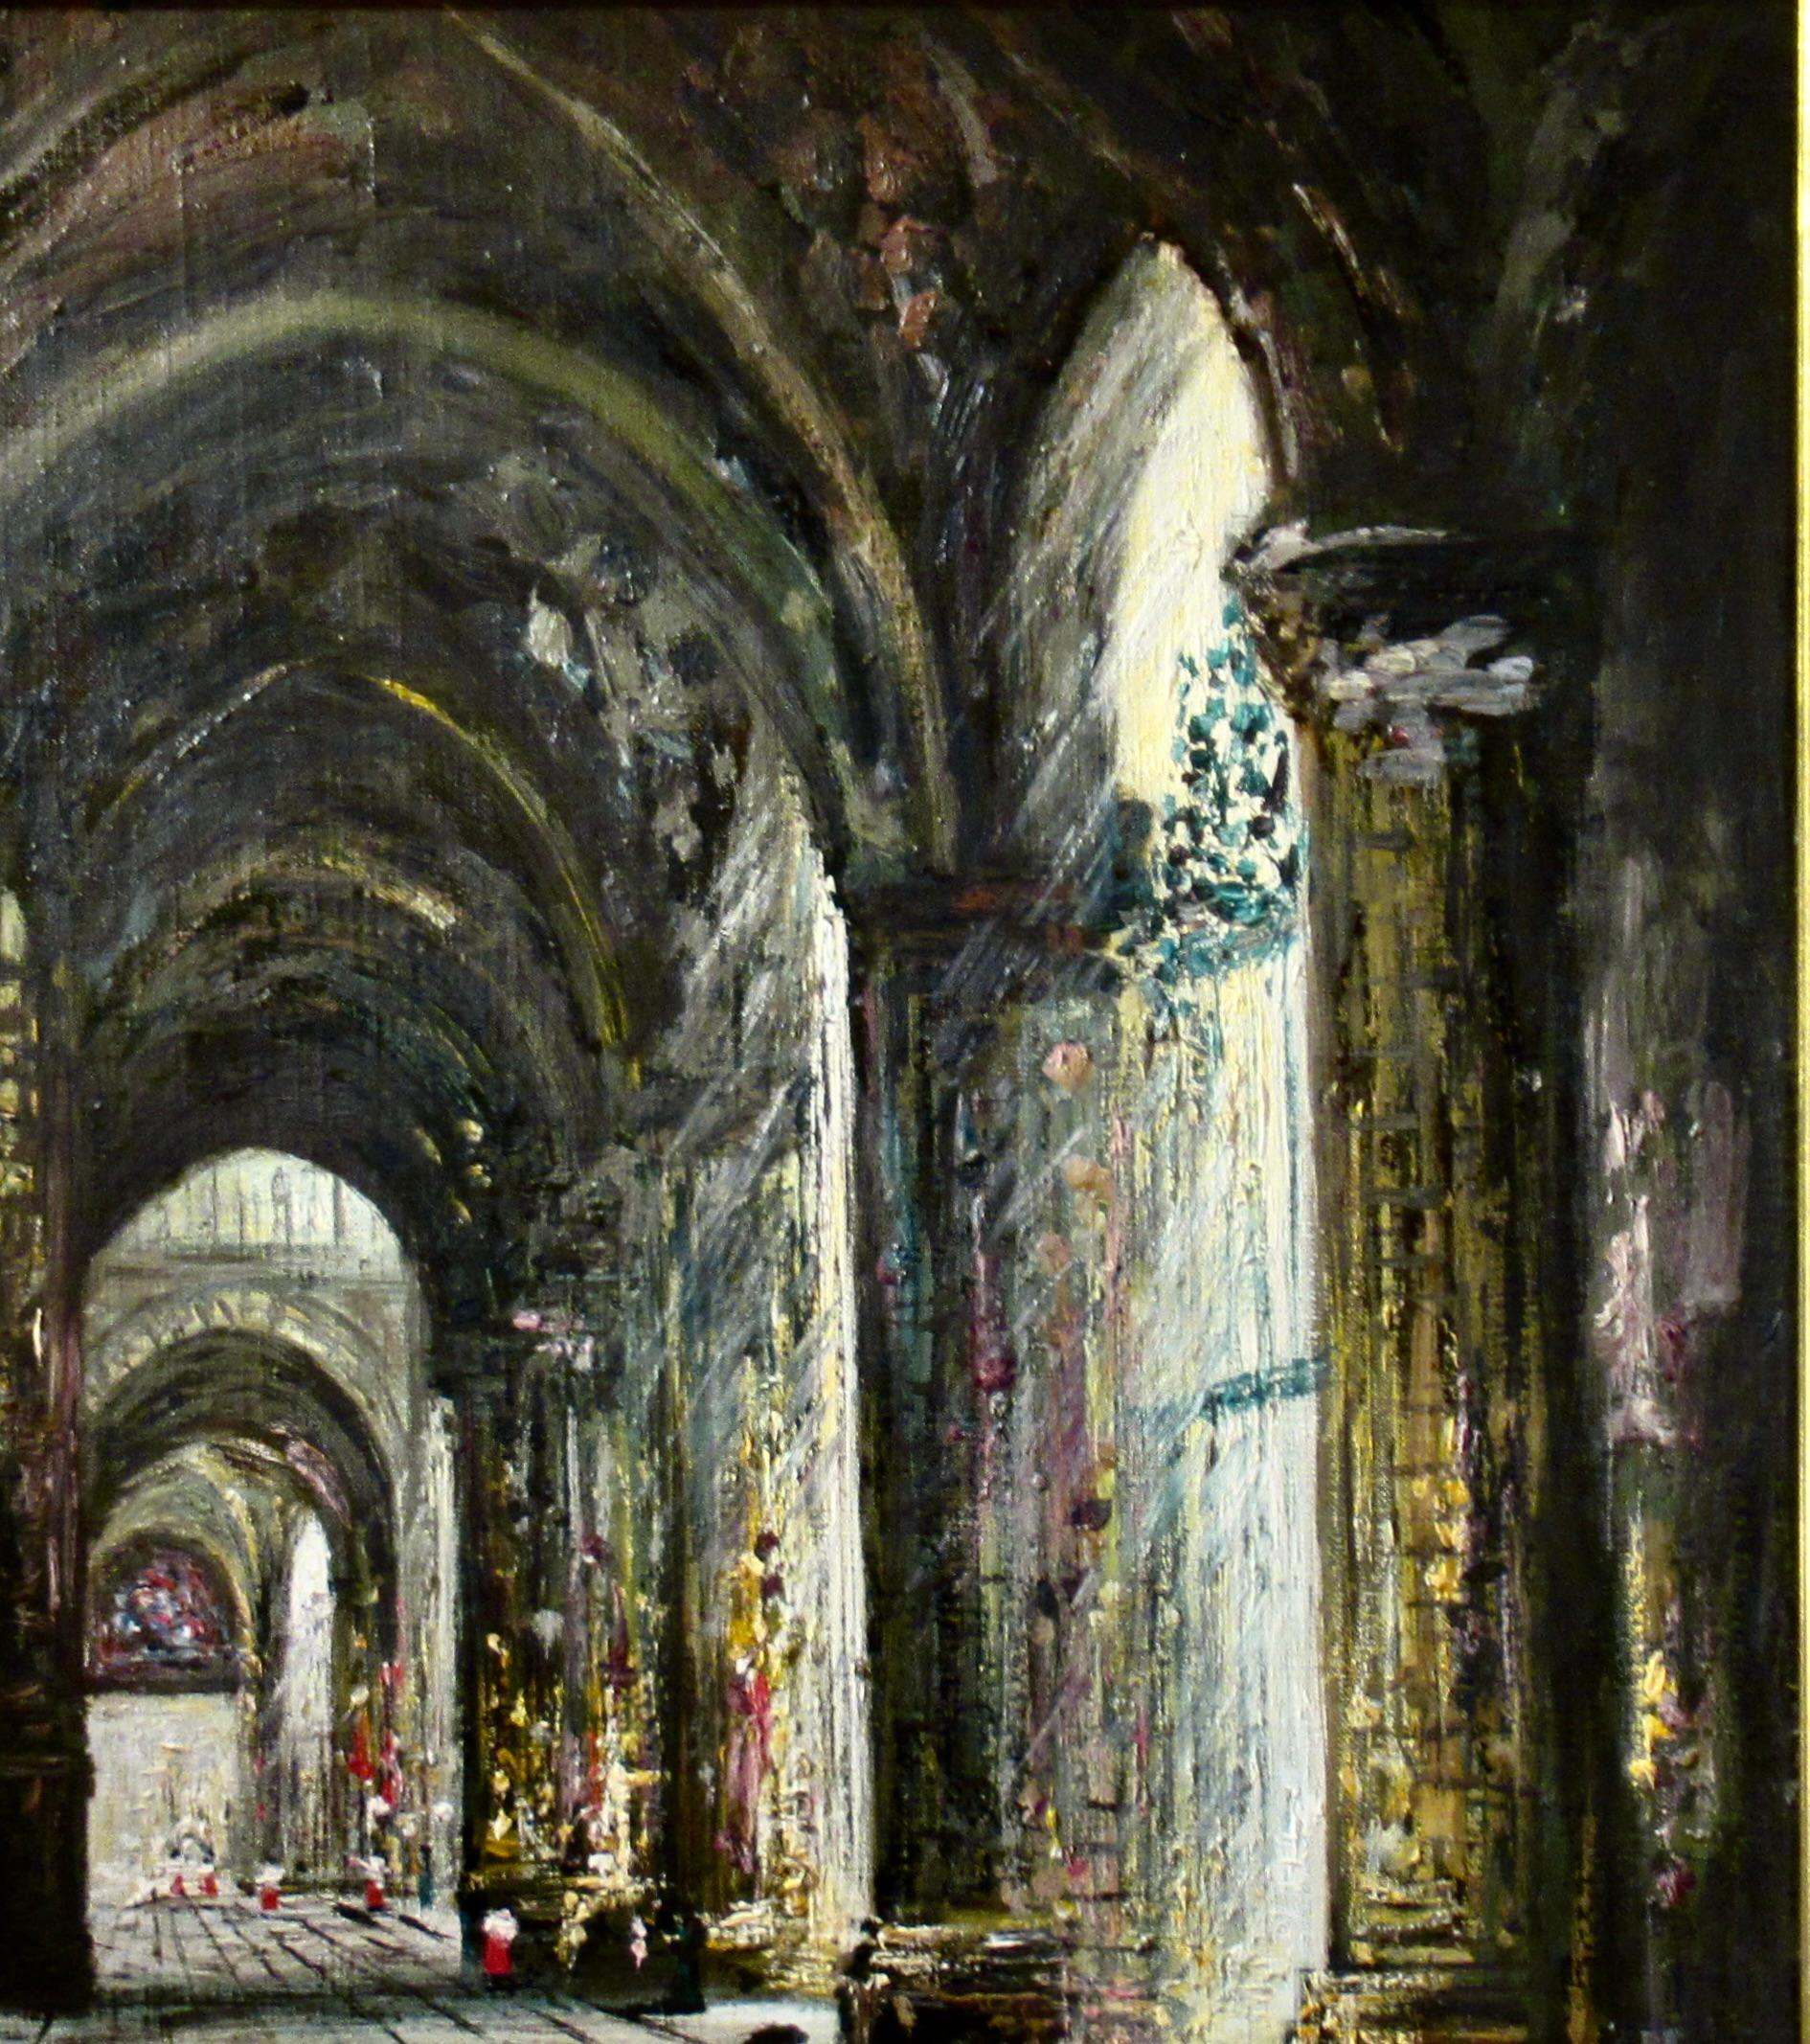 Artist:   Fermin Santos Alcade
Title:    Catedral de Toledo, Espana II
Year:    Circa 1960
Medium:	Oil on canvas board
Canvas board size: 28.5 x 21.25 inches
Framed size: 33 x 25.75 inches
Signature:   Signed lower left by the artist
Condition:  